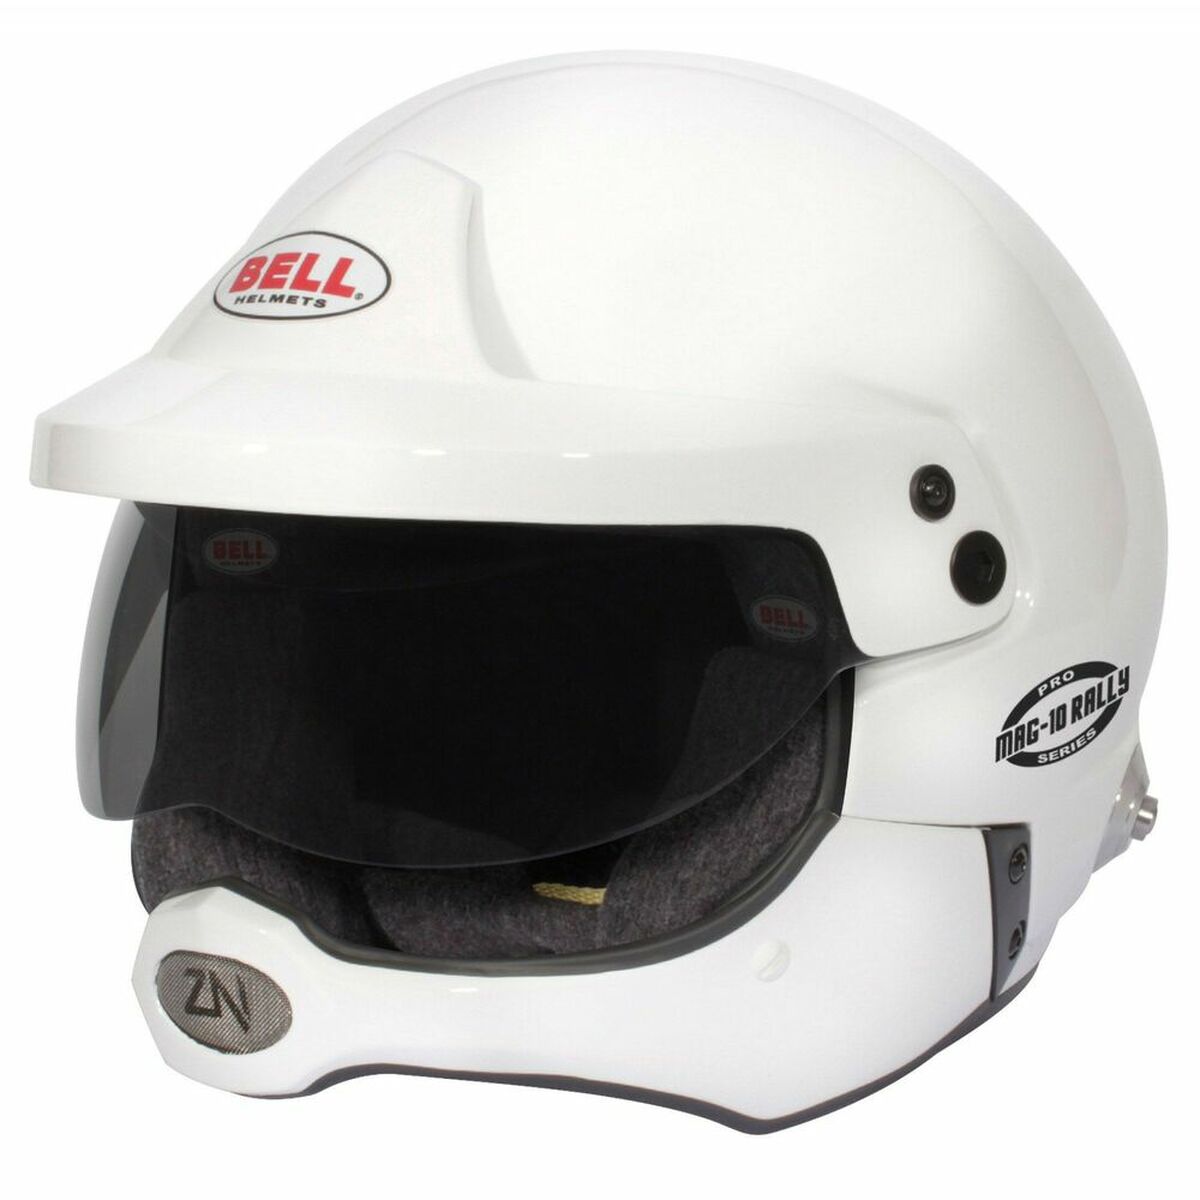 Capacete Bell Mag-10 Rally Pro, S (57 cm)